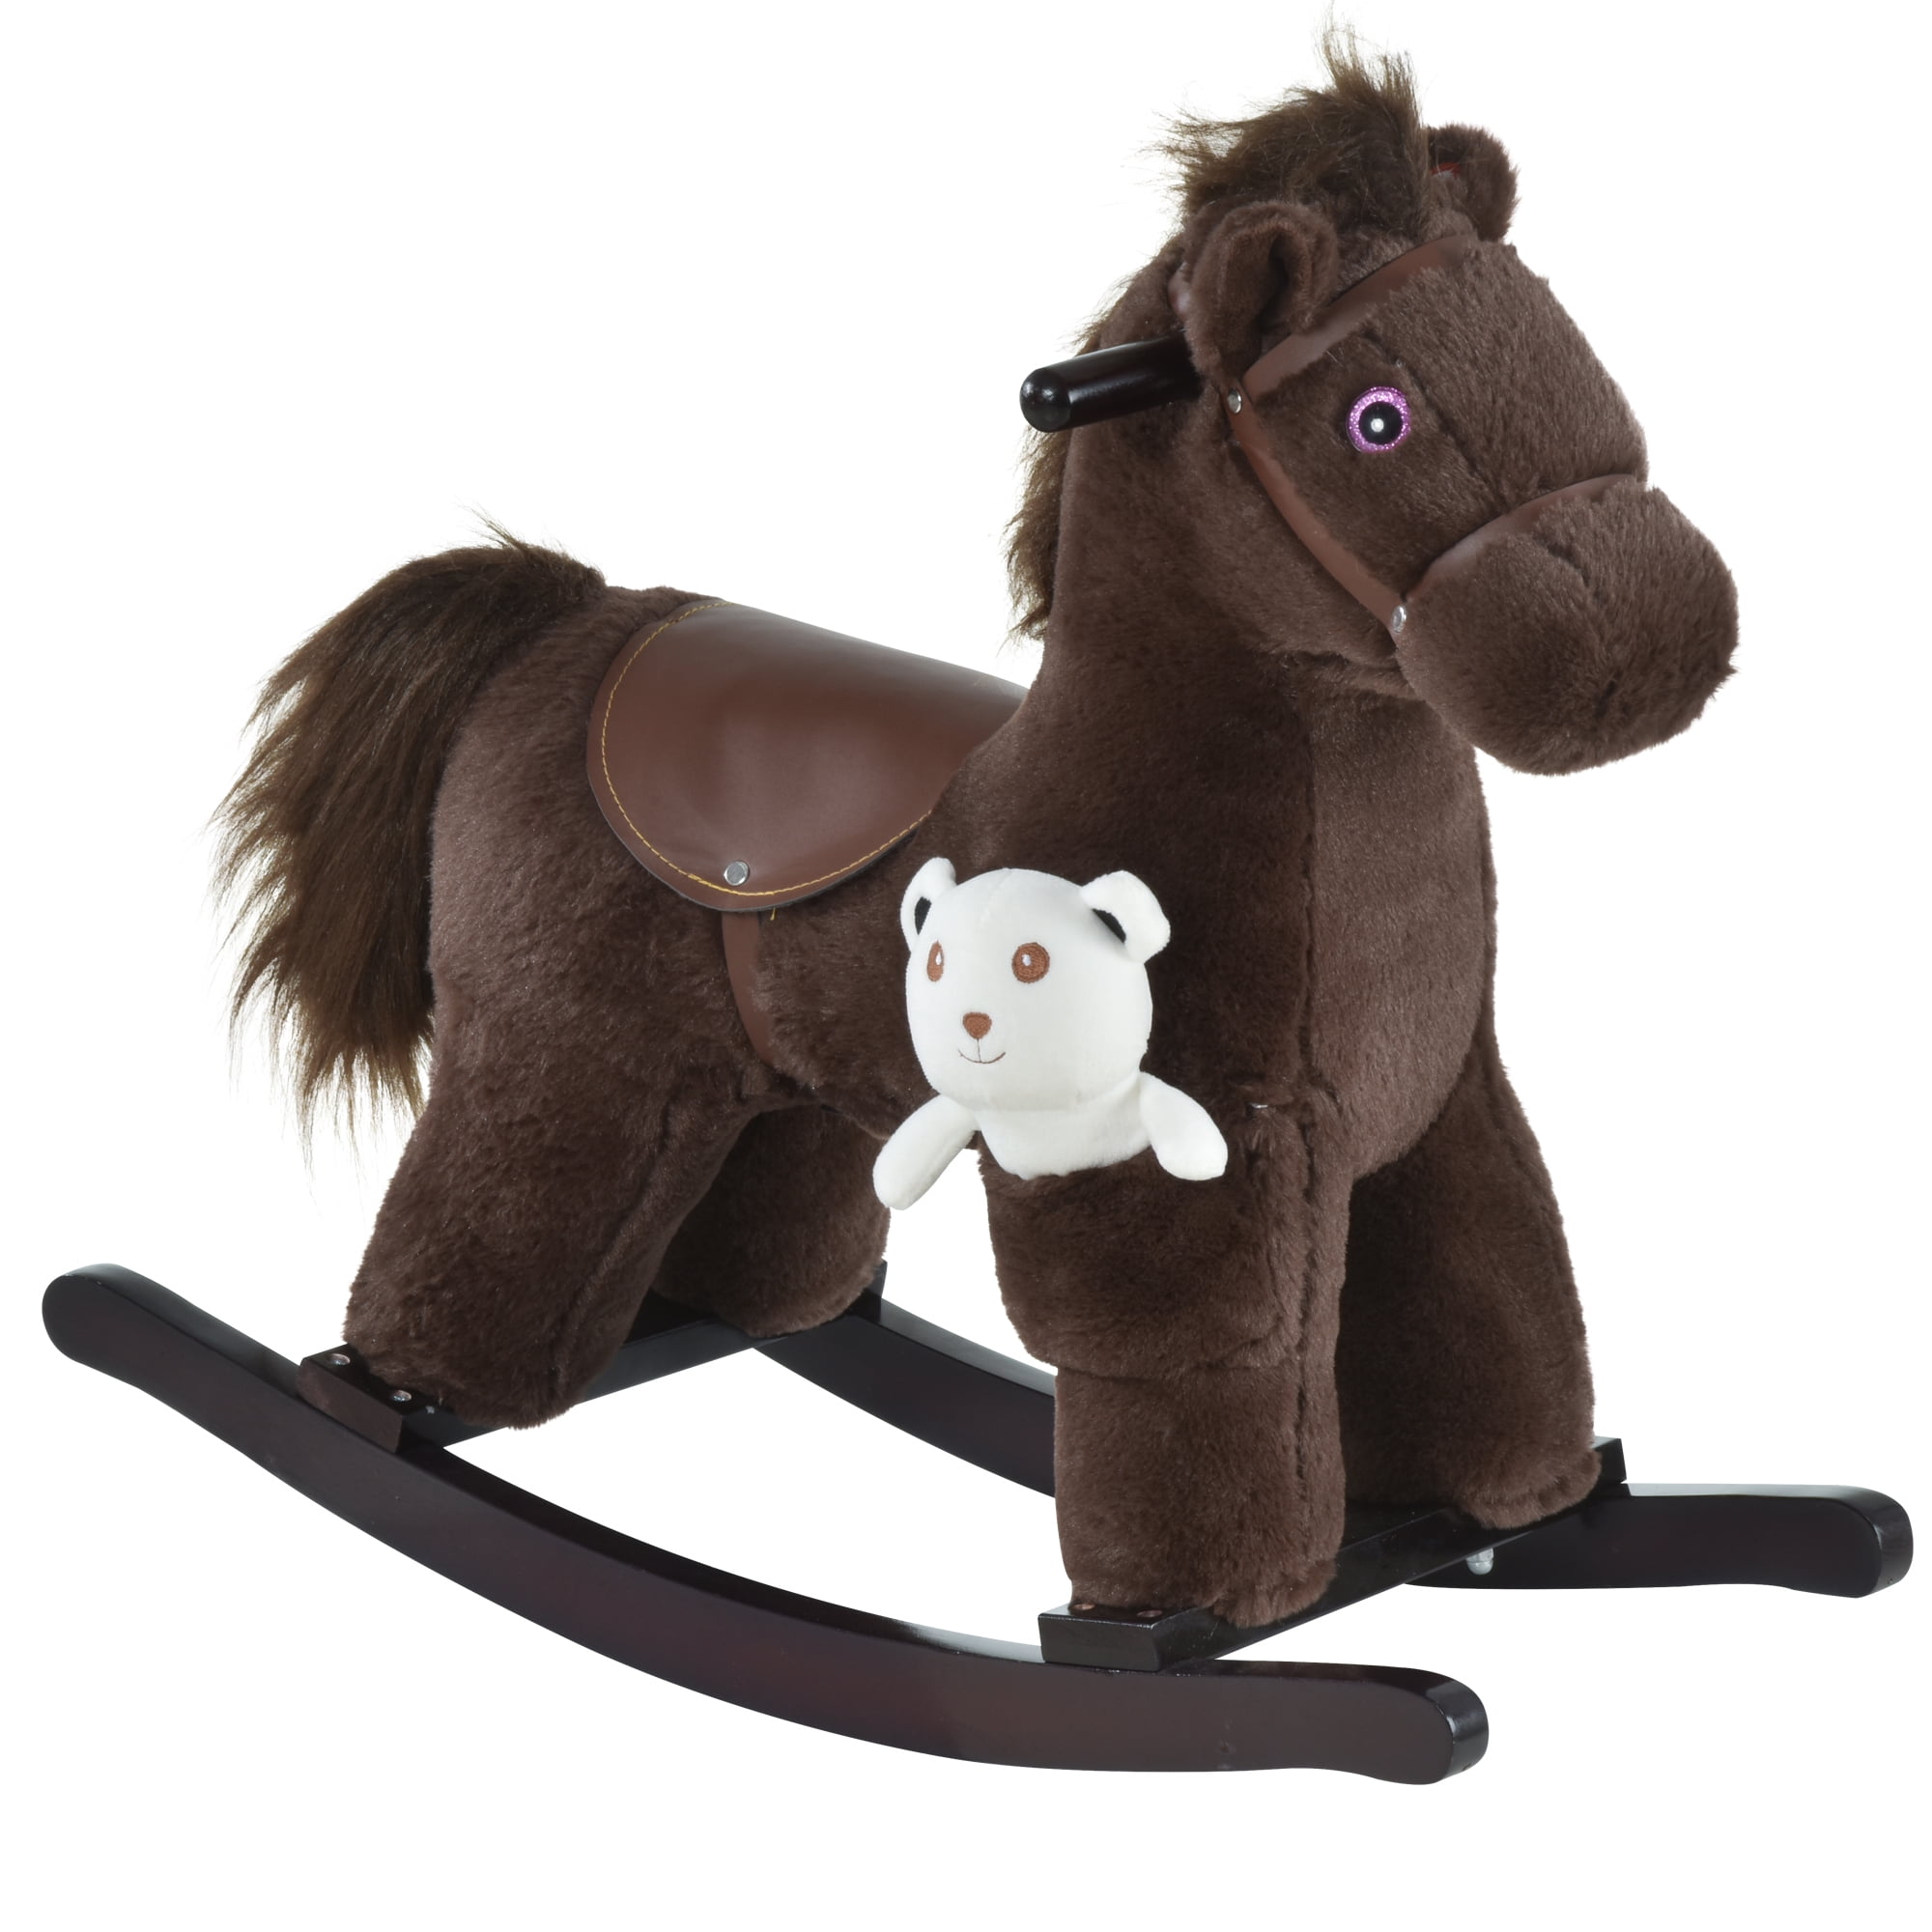 Kids Ride On Rocking Horse Toys Plush Gift for Toddlers Boys Girls 18 Month 